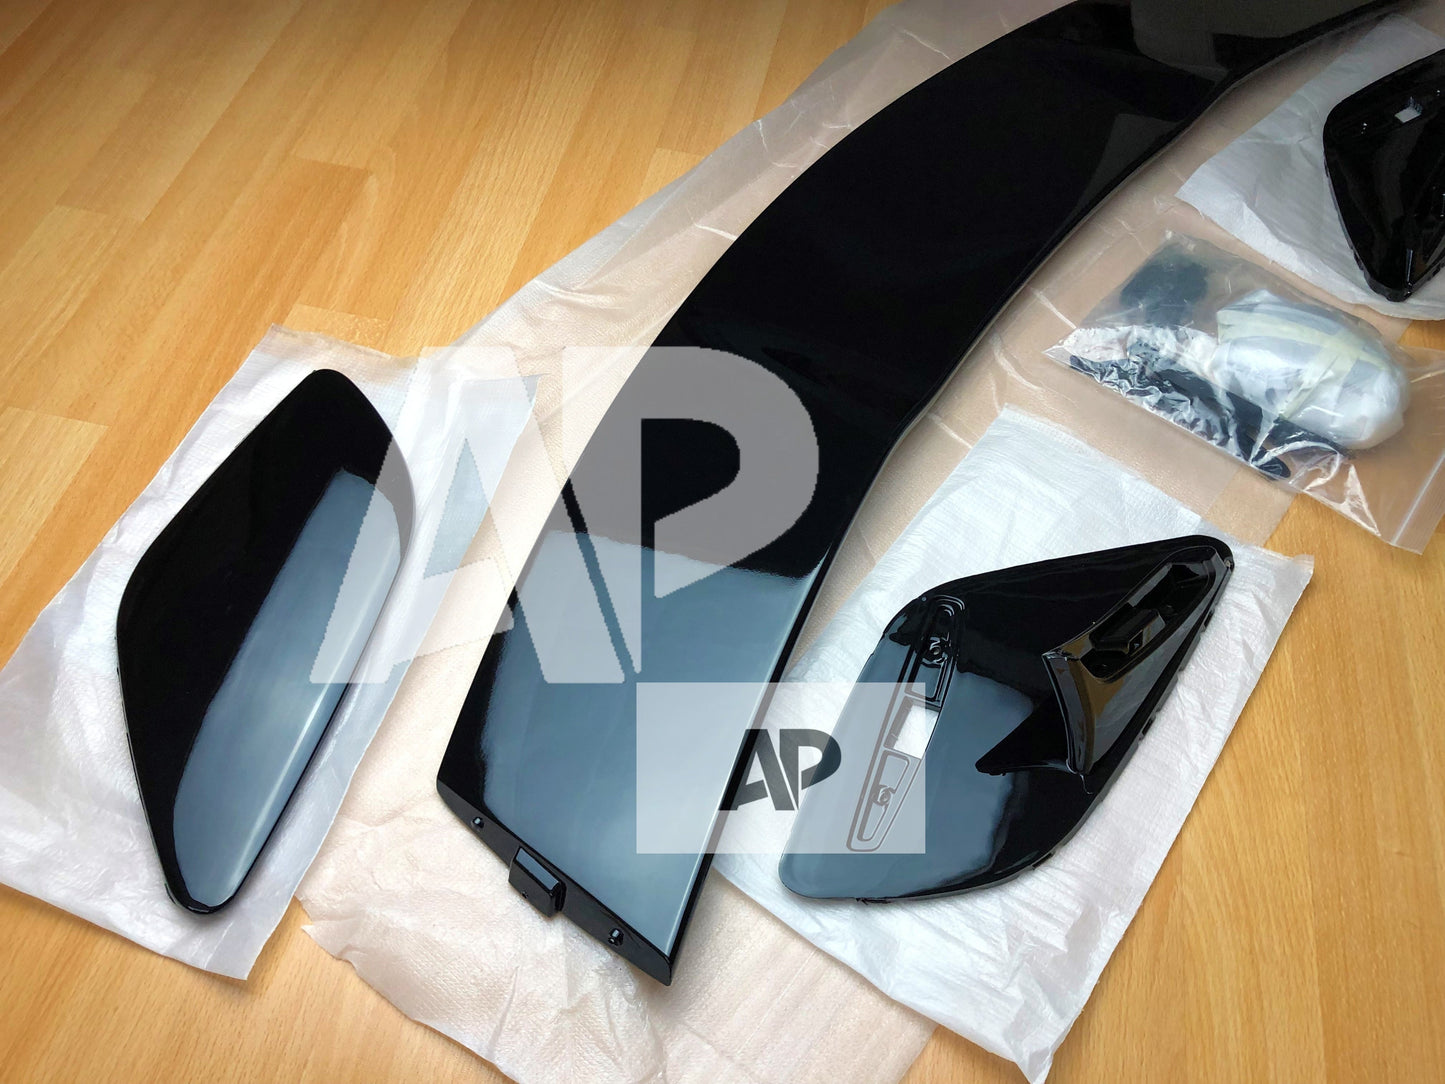 Mercedes 'A35 A45 AMG Style' A Class W177 Gloss Black Boot Roof Spoiler 2018 +